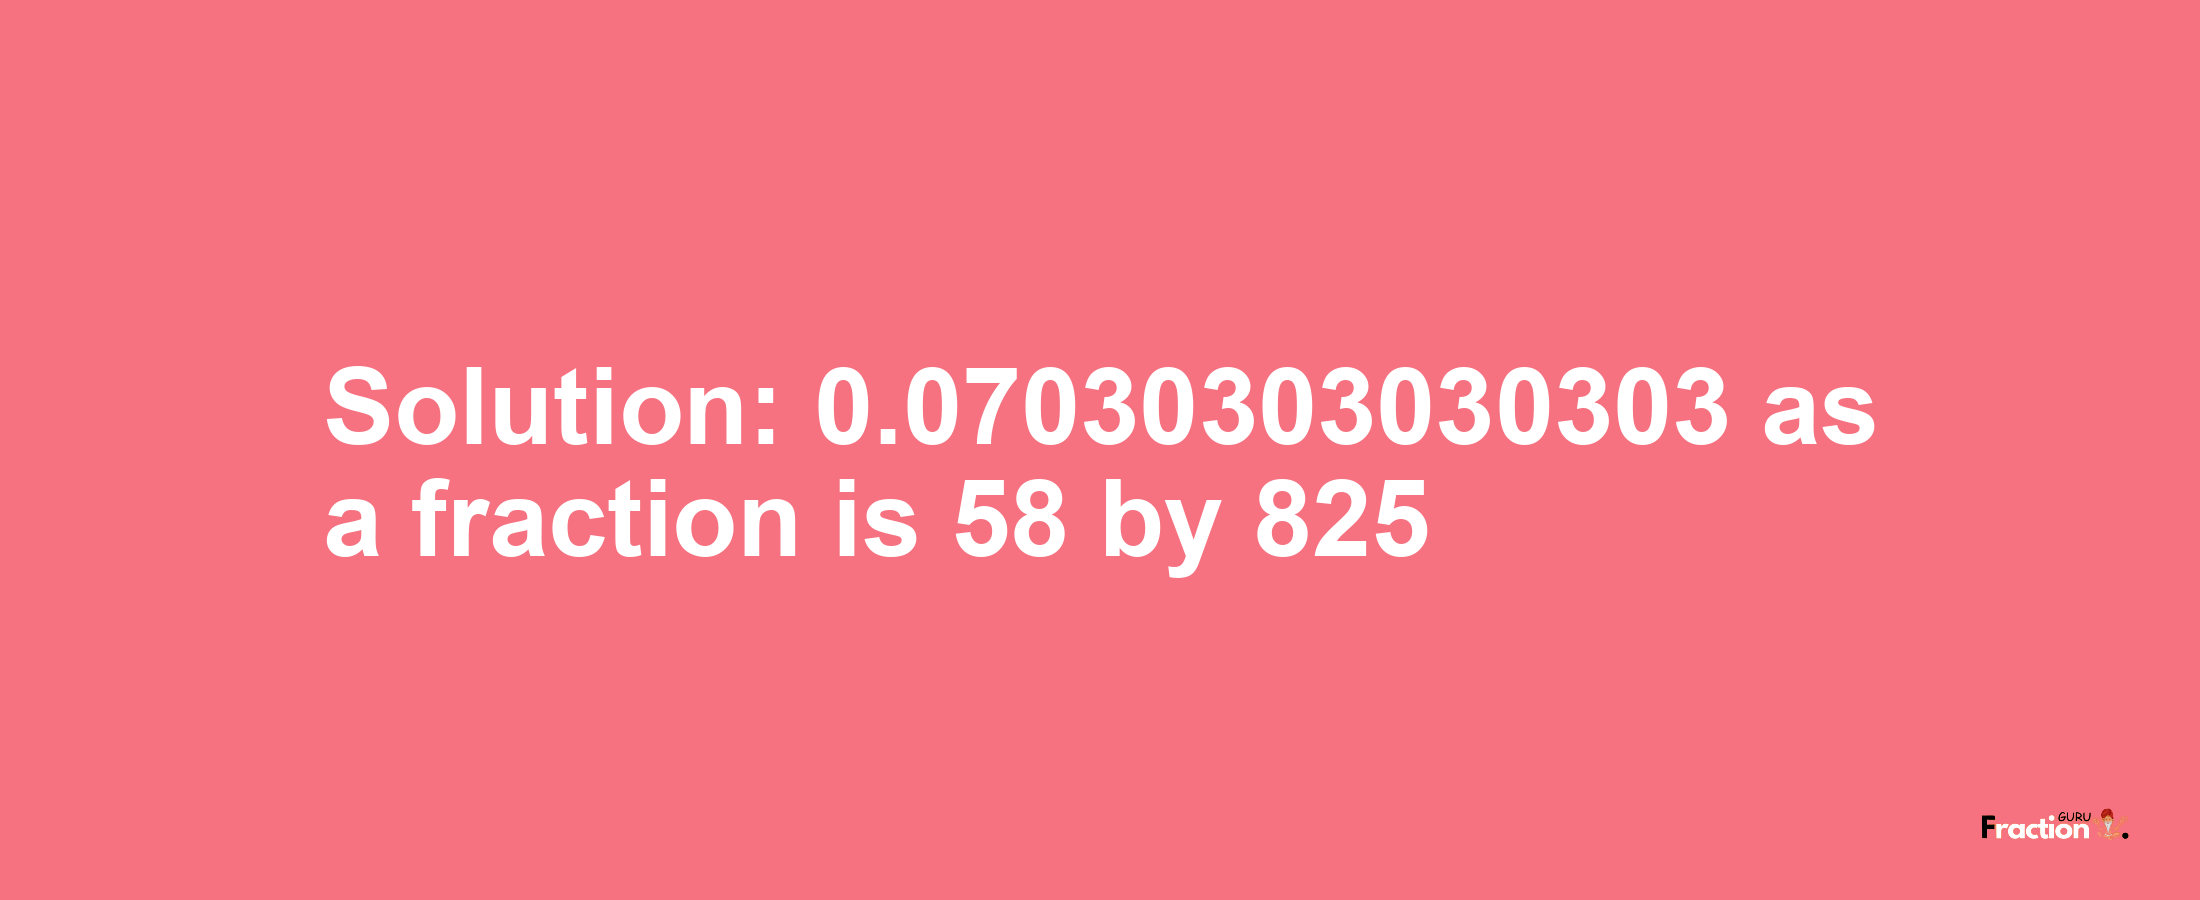 Solution:0.07030303030303 as a fraction is 58/825